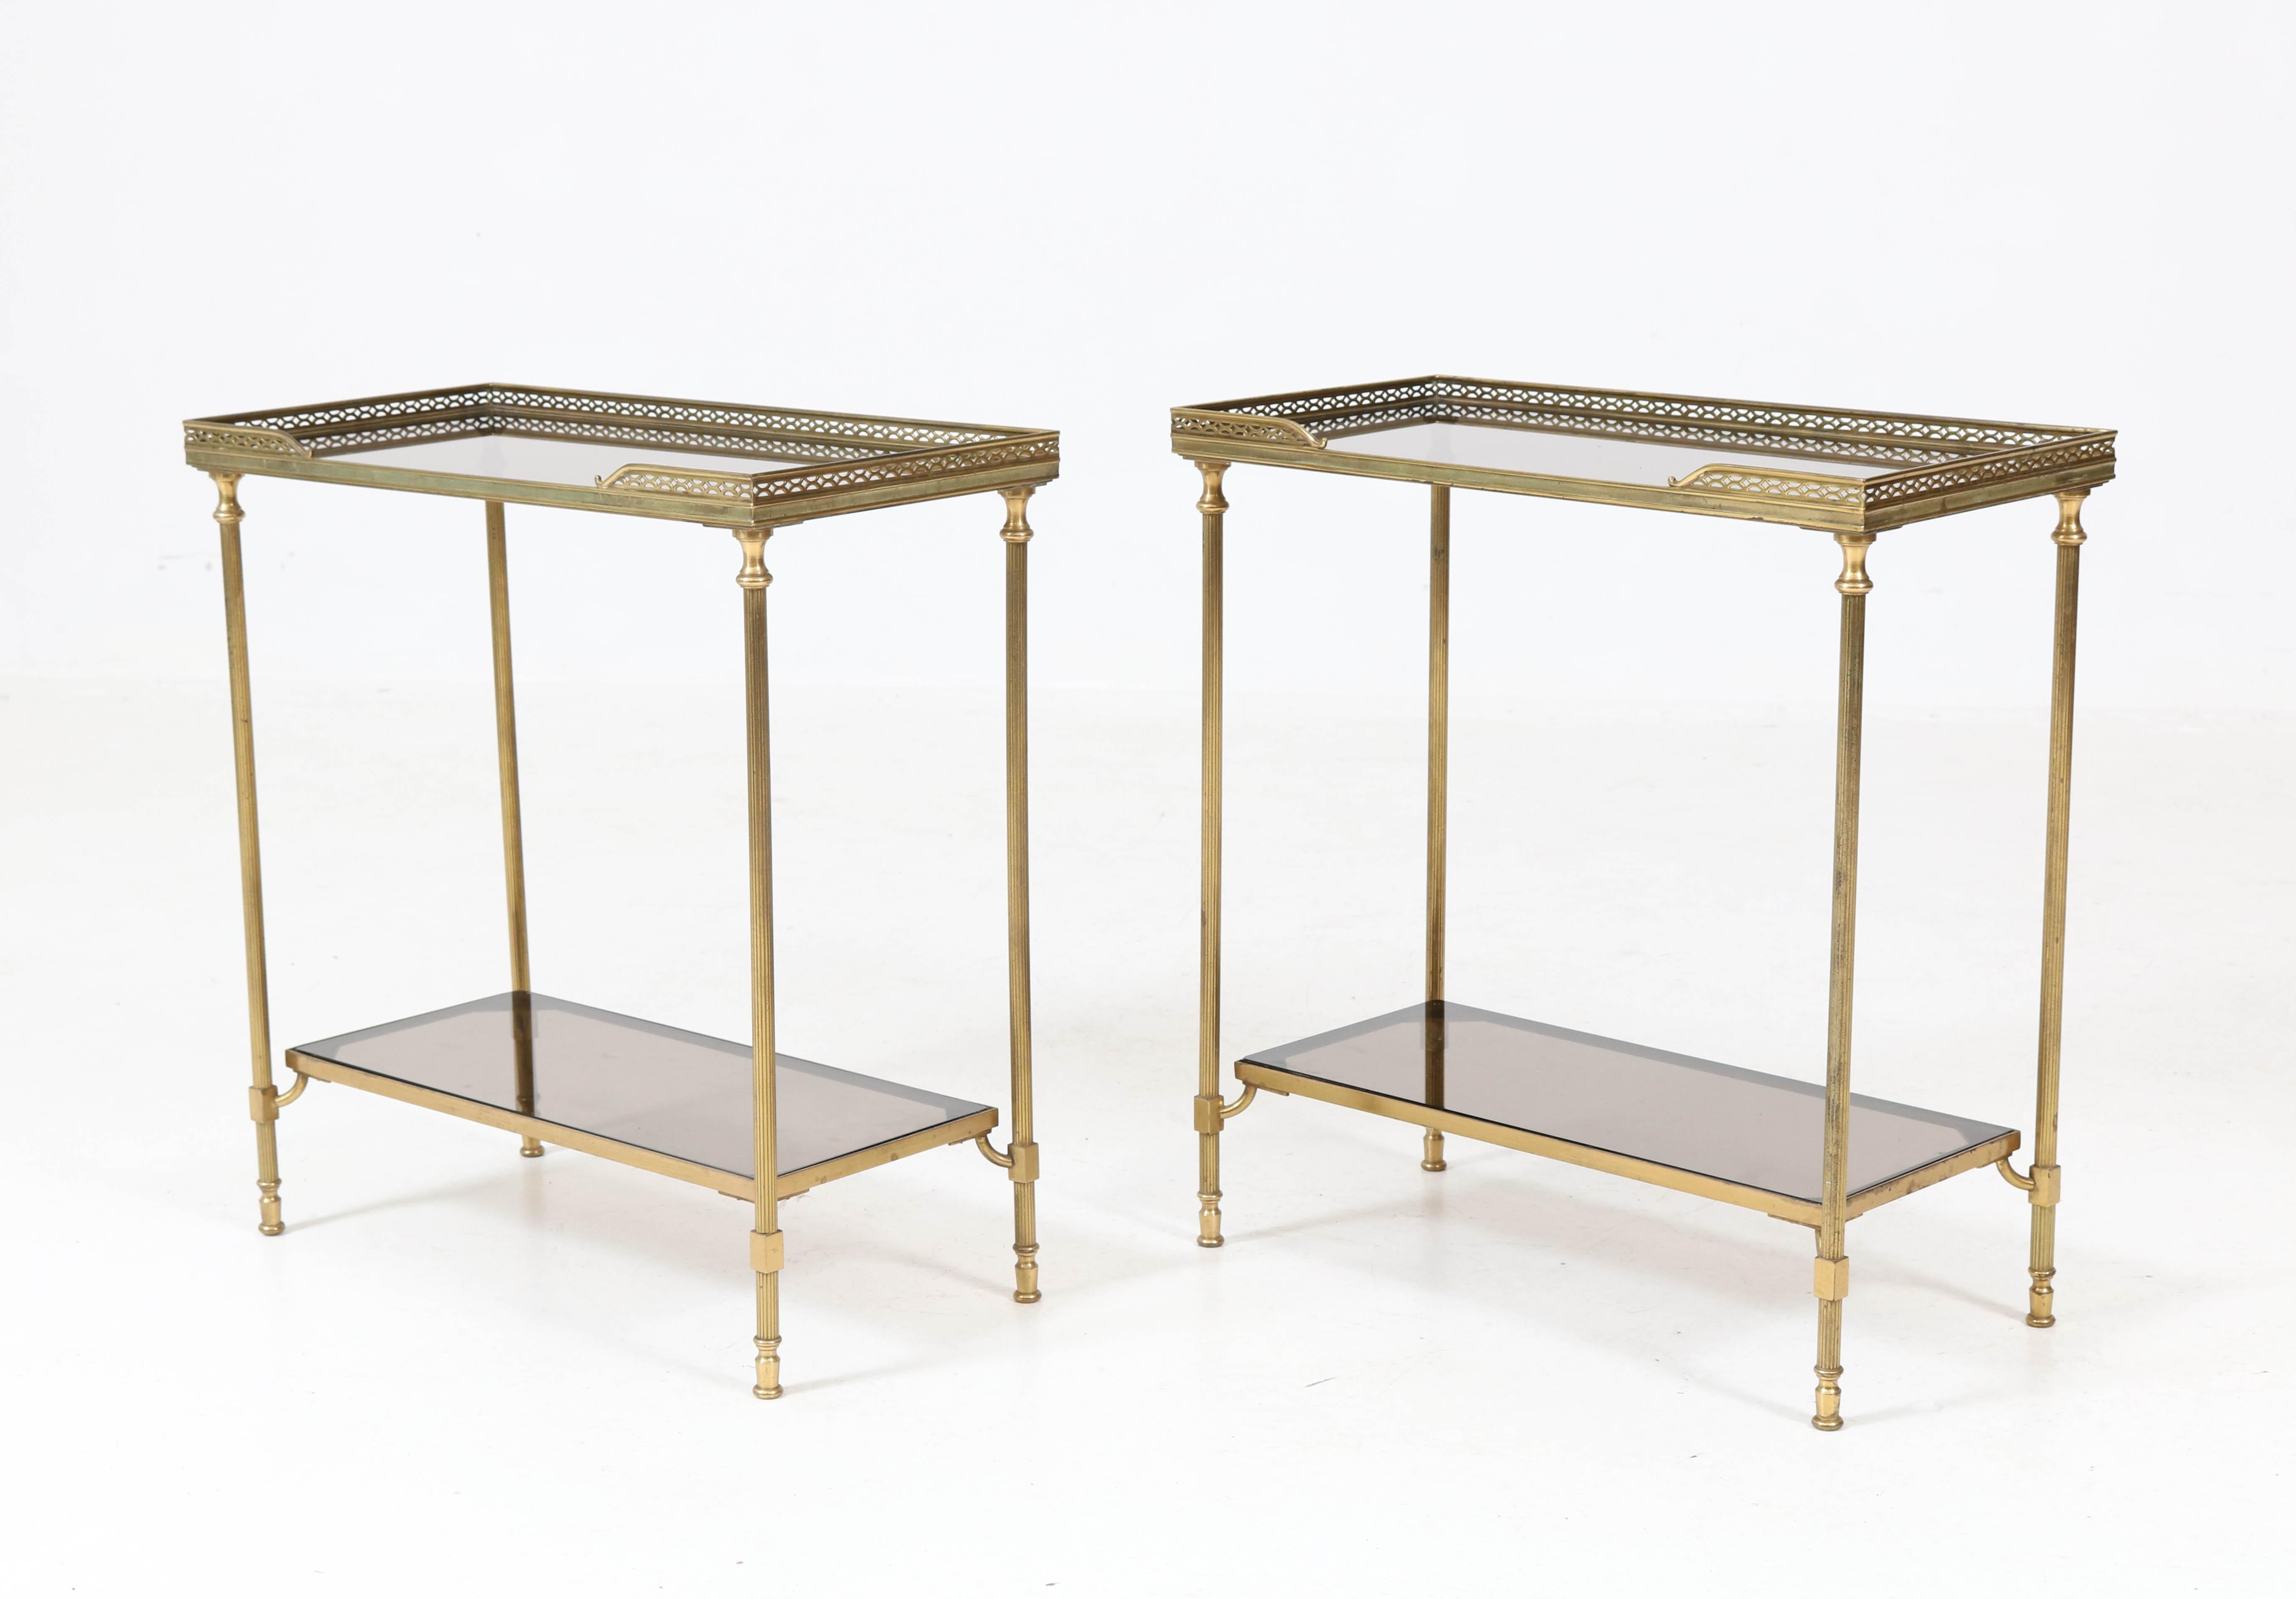 Pair of Hollywood Regency side tables by Maison Jansen, 1970s.
Gilt brass frames with original brown-bluish glass tops.
Minor chip in one of the tops but not to see when placed in the frame.
In good original condition with minor wear consistent